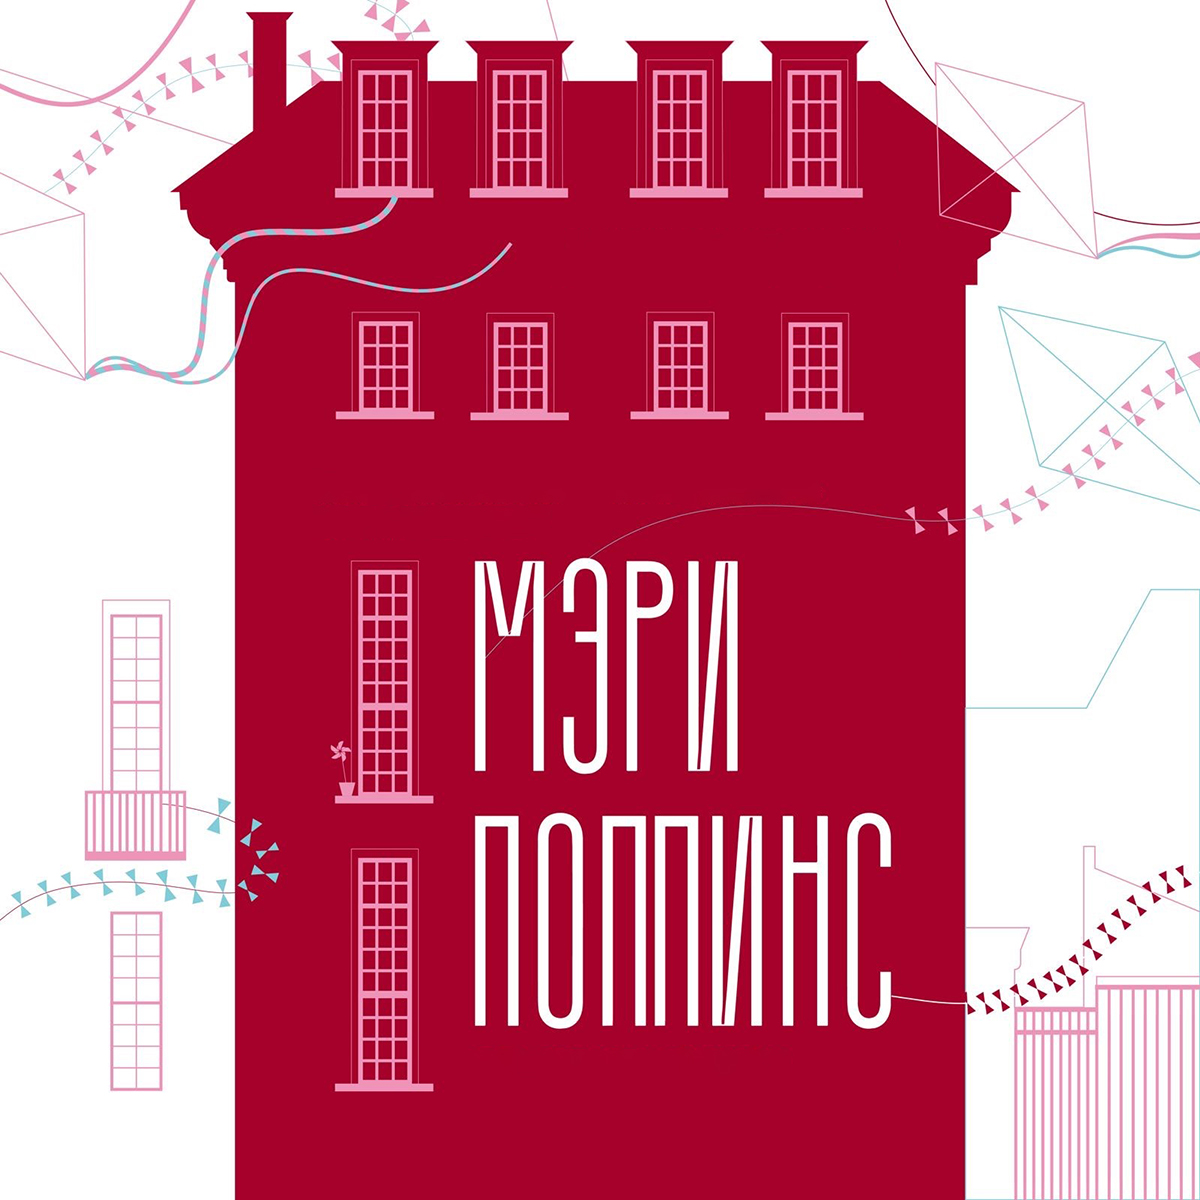 Mary Poppins in Russian text set over an image of a pink and red building with kites flying